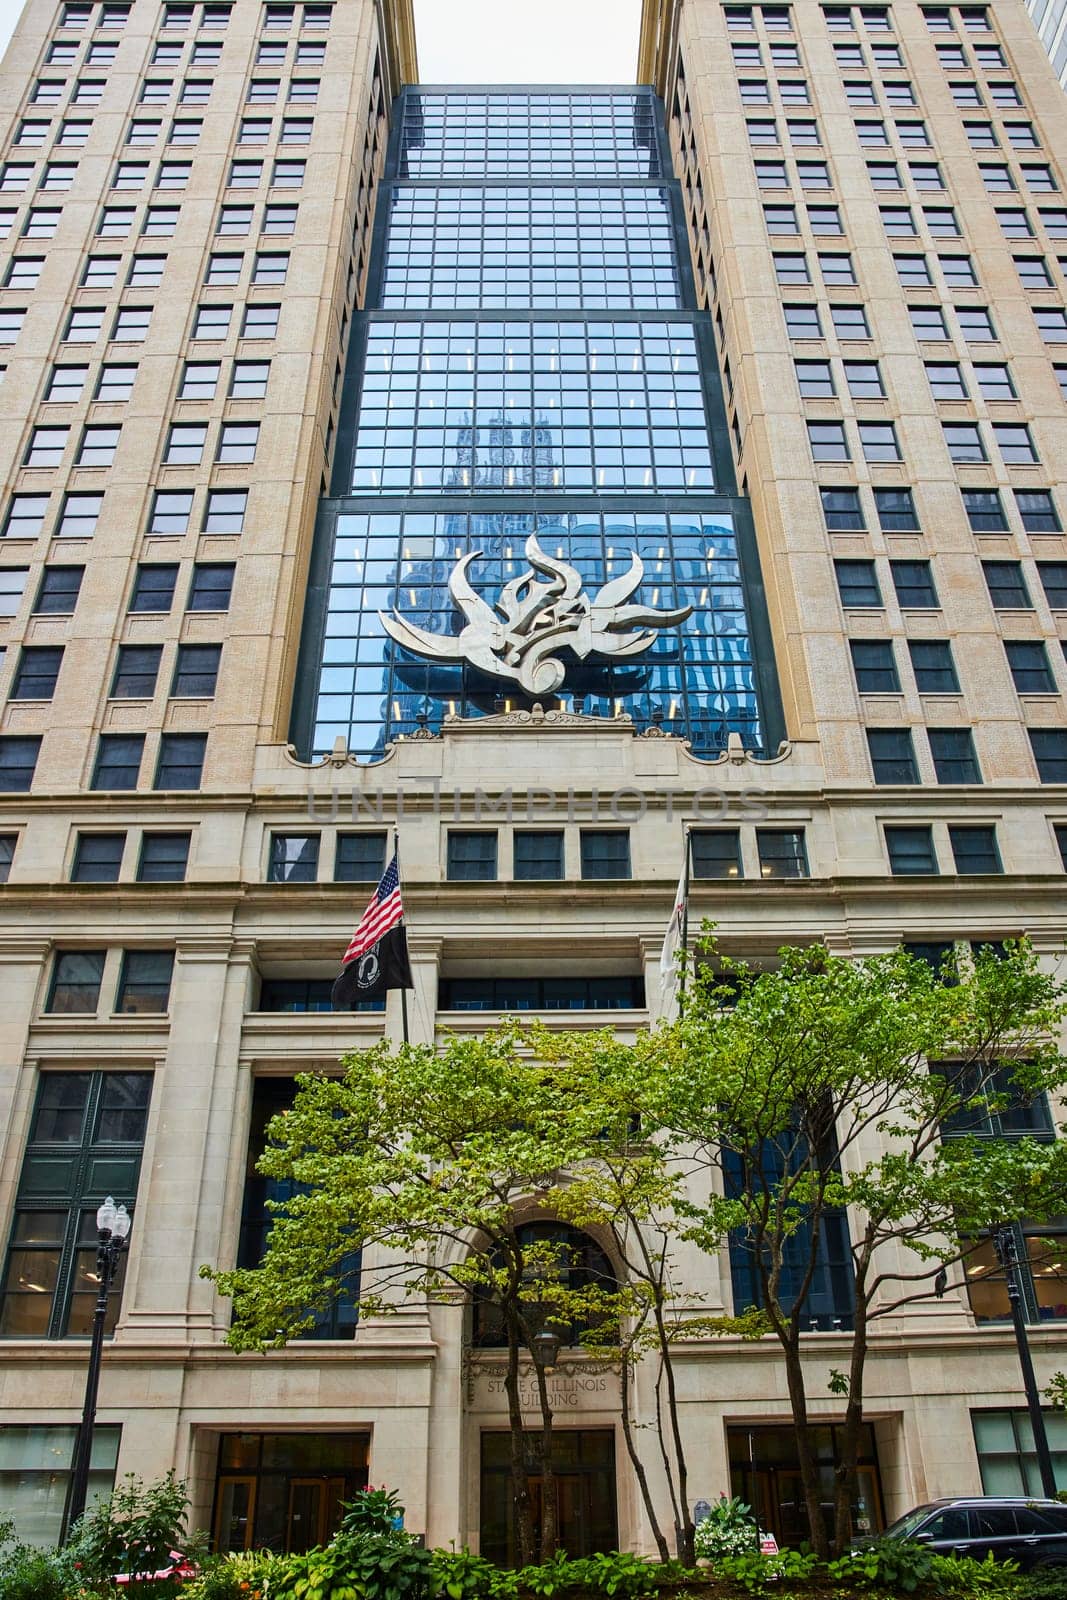 Chicago public art, abstract flame sculpture on building with reflective blue windows and green tree by njproductions